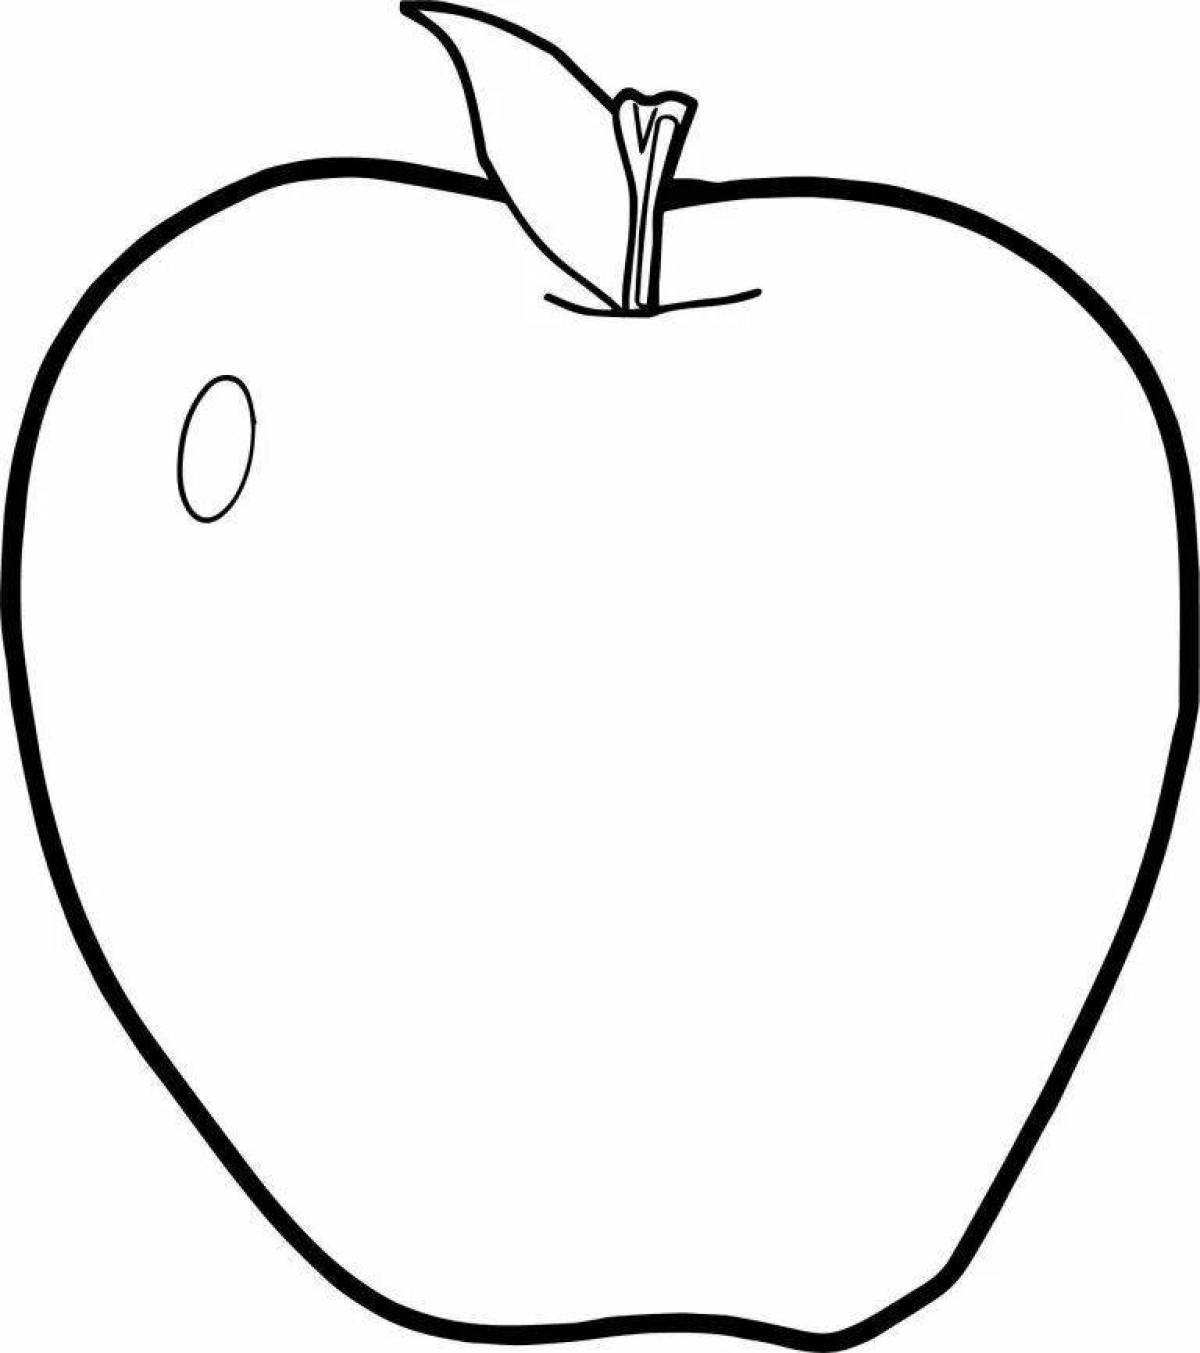 Complex drawing of an apple